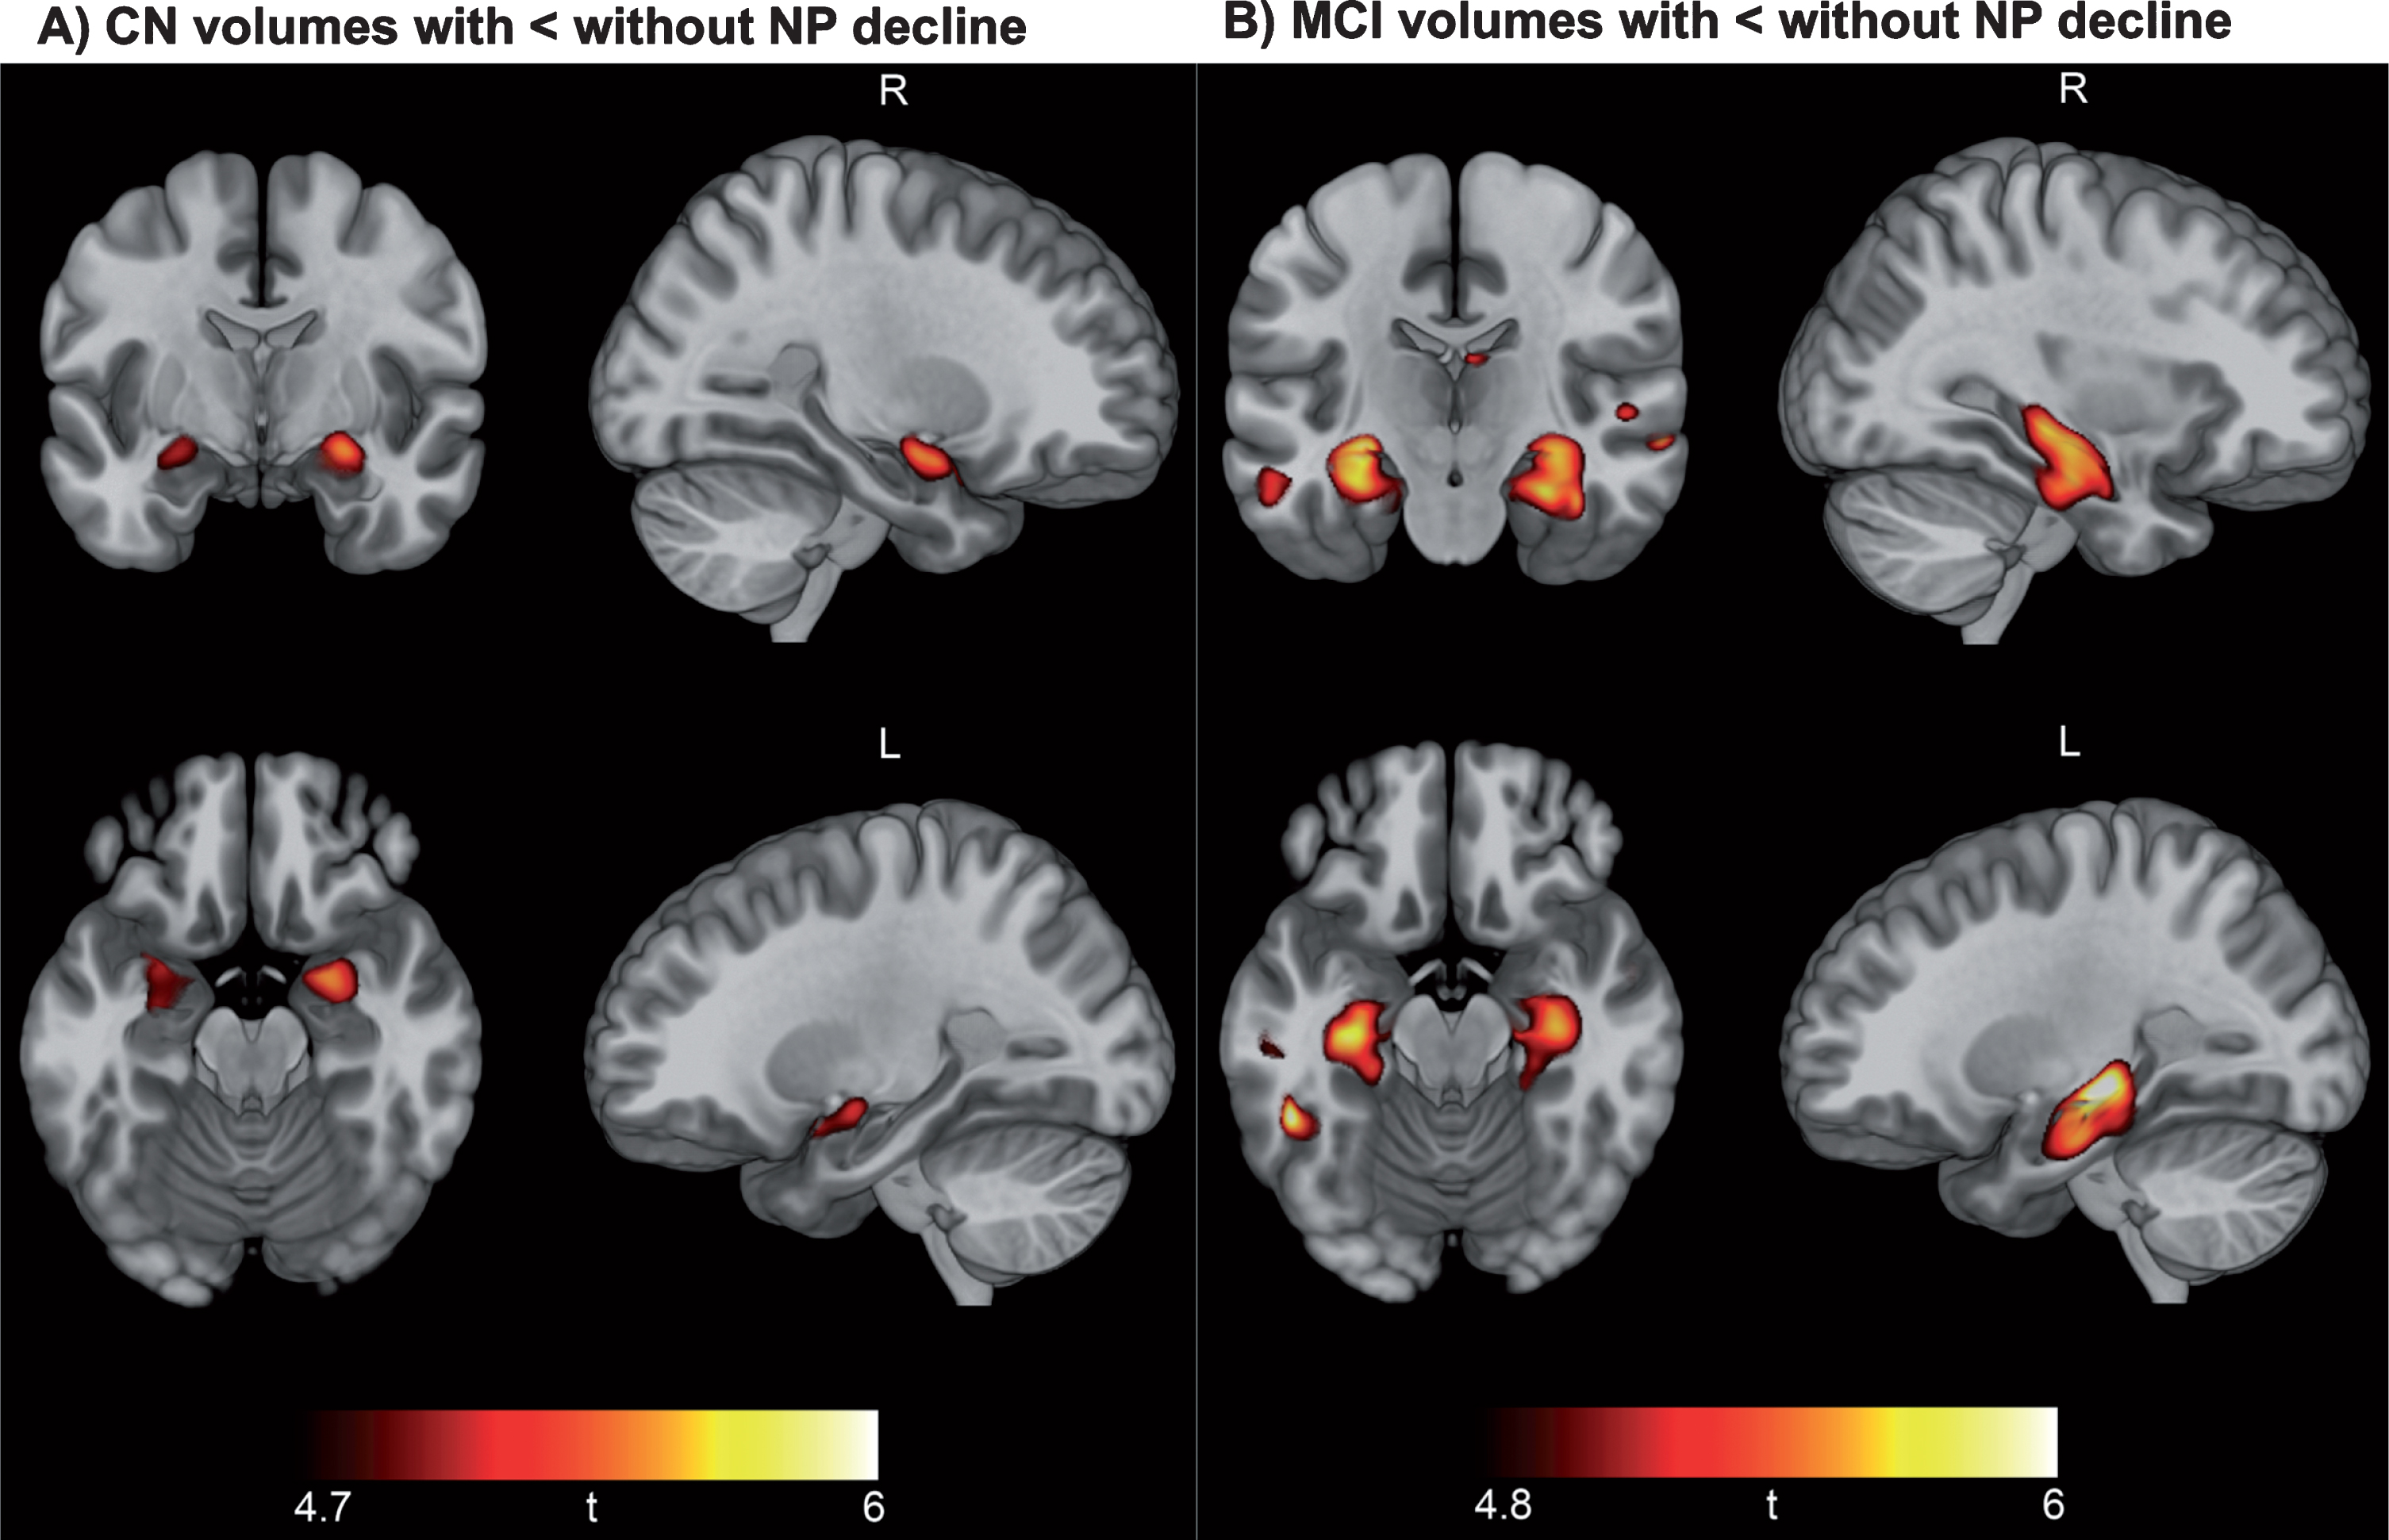 Neuropsychological decline linked to baseline hippocampal and medial temporal lobe volume. Results of voxel-based morphometry analysis after FWE correction are displayed as t-maps overlaid onto a template T1 image for anatomical reference. Findings from two-sample t-tests show a consistent pattern of smaller hippocampal volume in CN participants with NP decline versus CN without NP decline (A) and smaller hippocampal and medial temporal volume in MCI patients with NP decline versus MCI without NP decline (B).